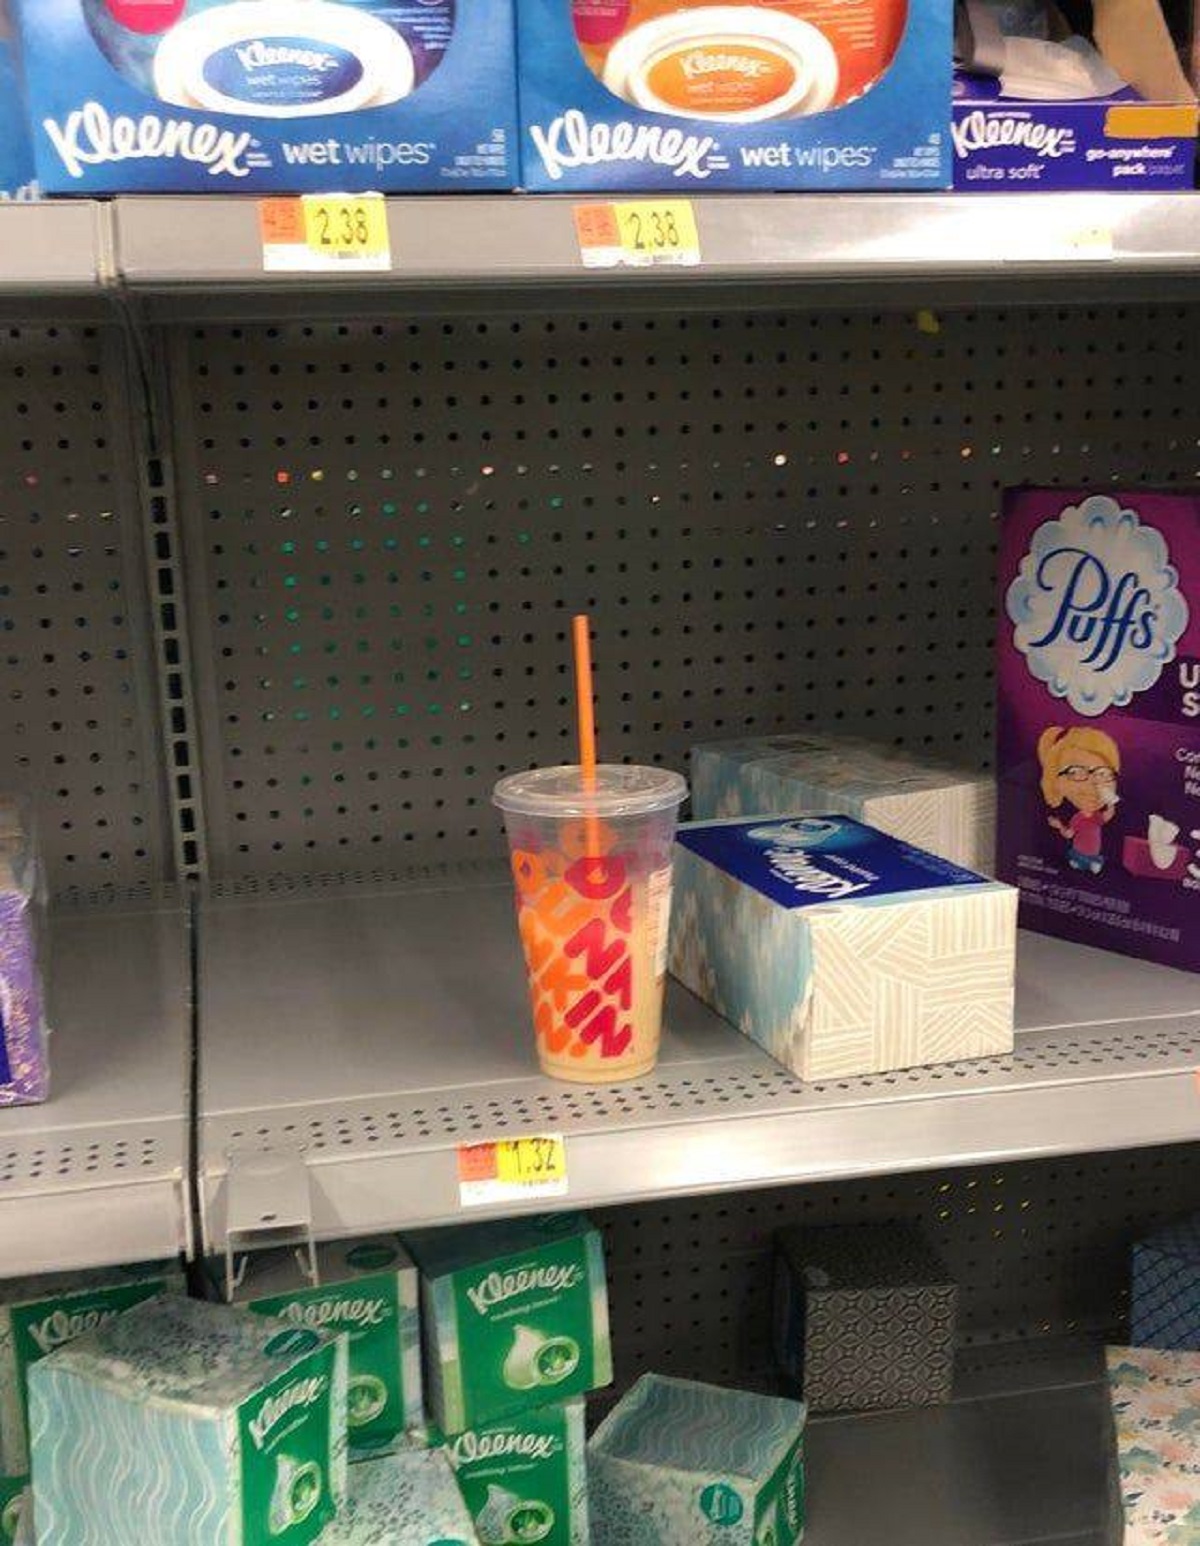 30 Pics That Are Mildly Infuriating.